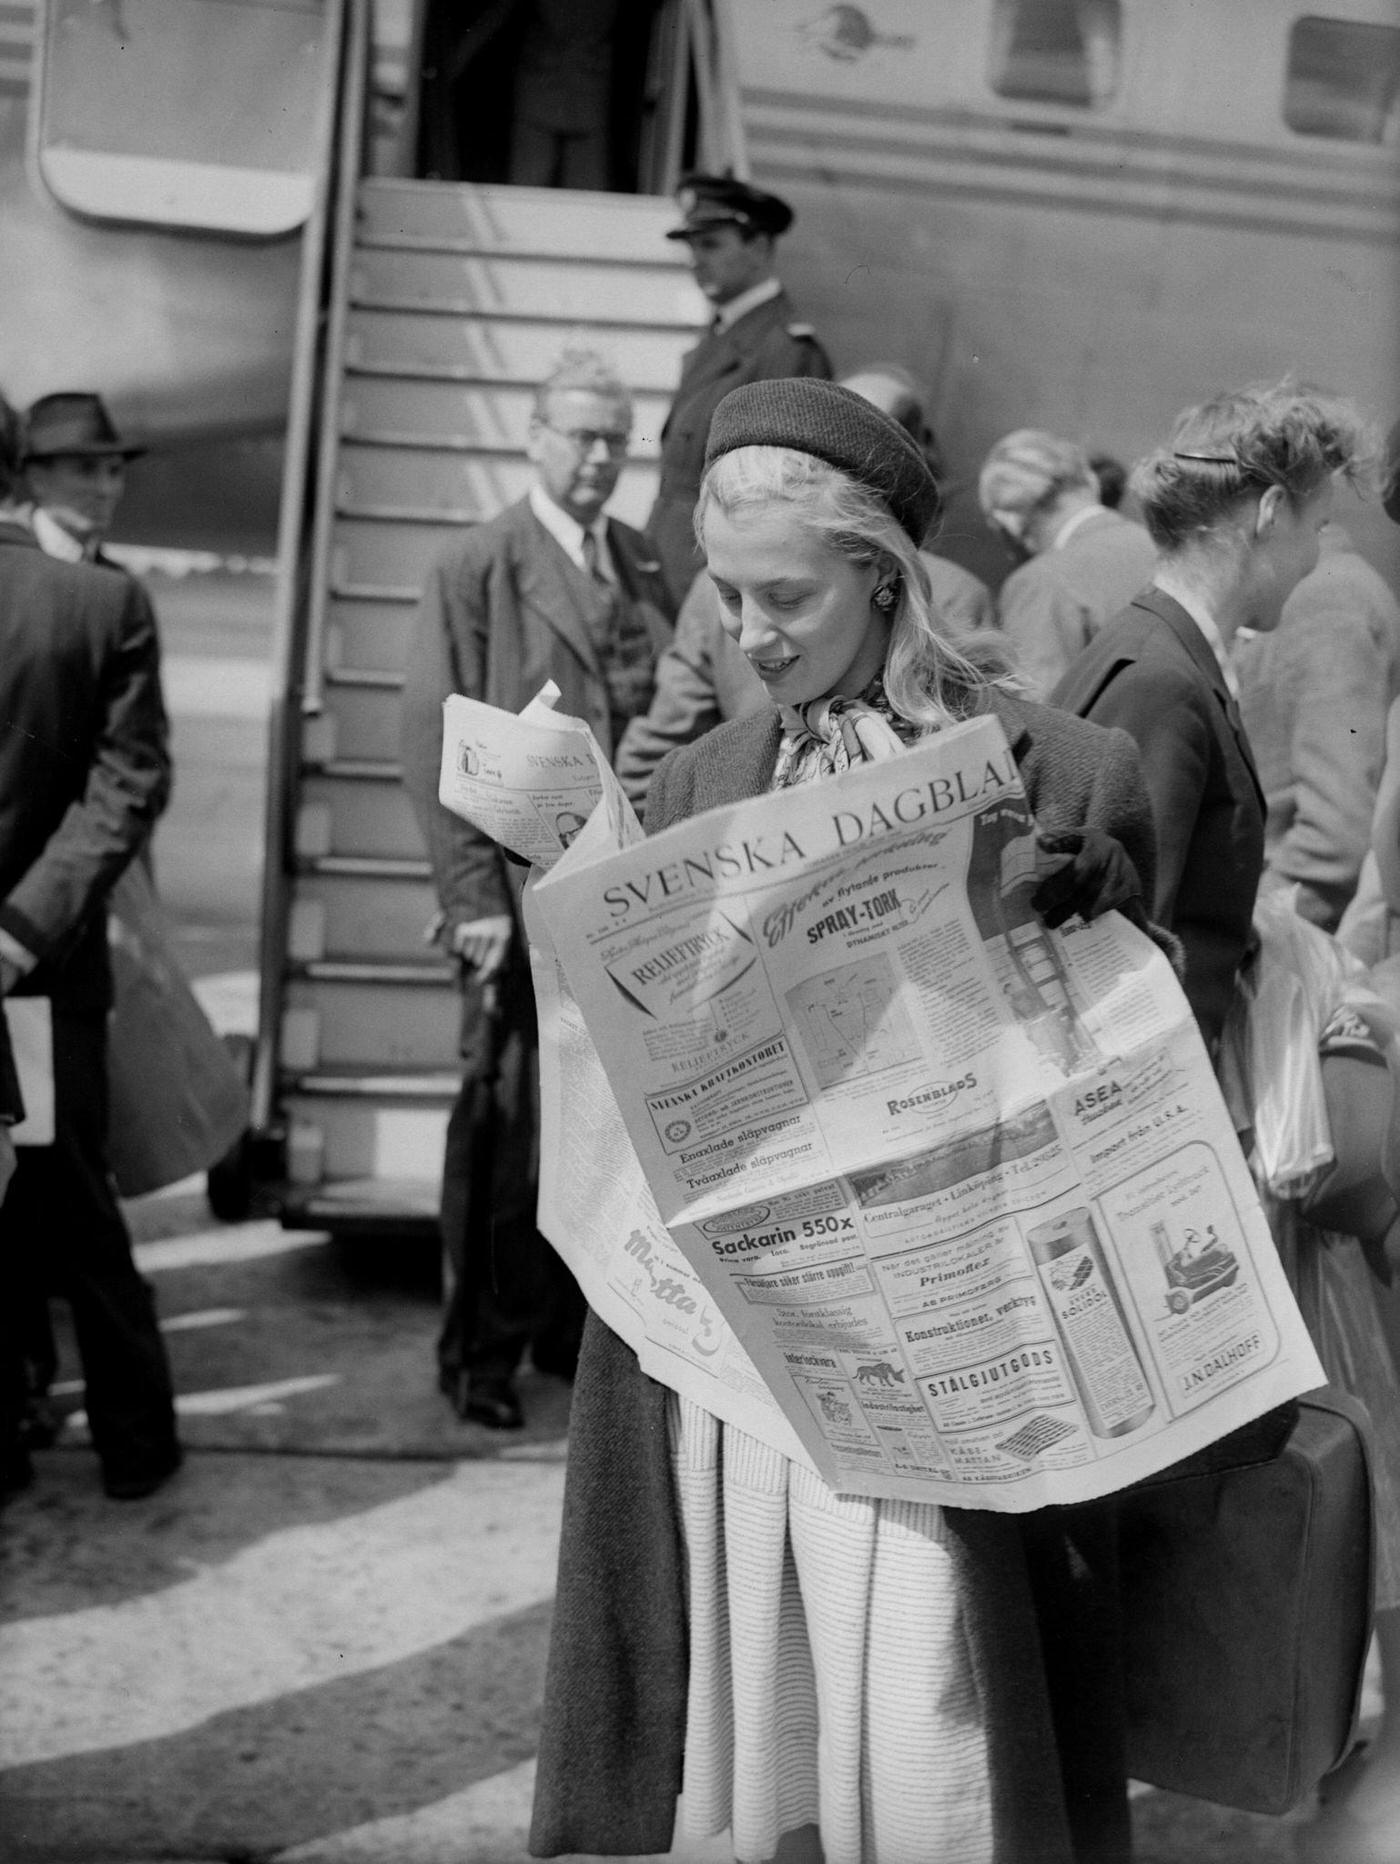 Swedish film actress Mai Zetterling is pictured reading a newspaper brought over from Sweden on the first passenger plane to arrive at Northolt Airport, England, since the merging of the Swedish, Norwegian, and Danish airlines.